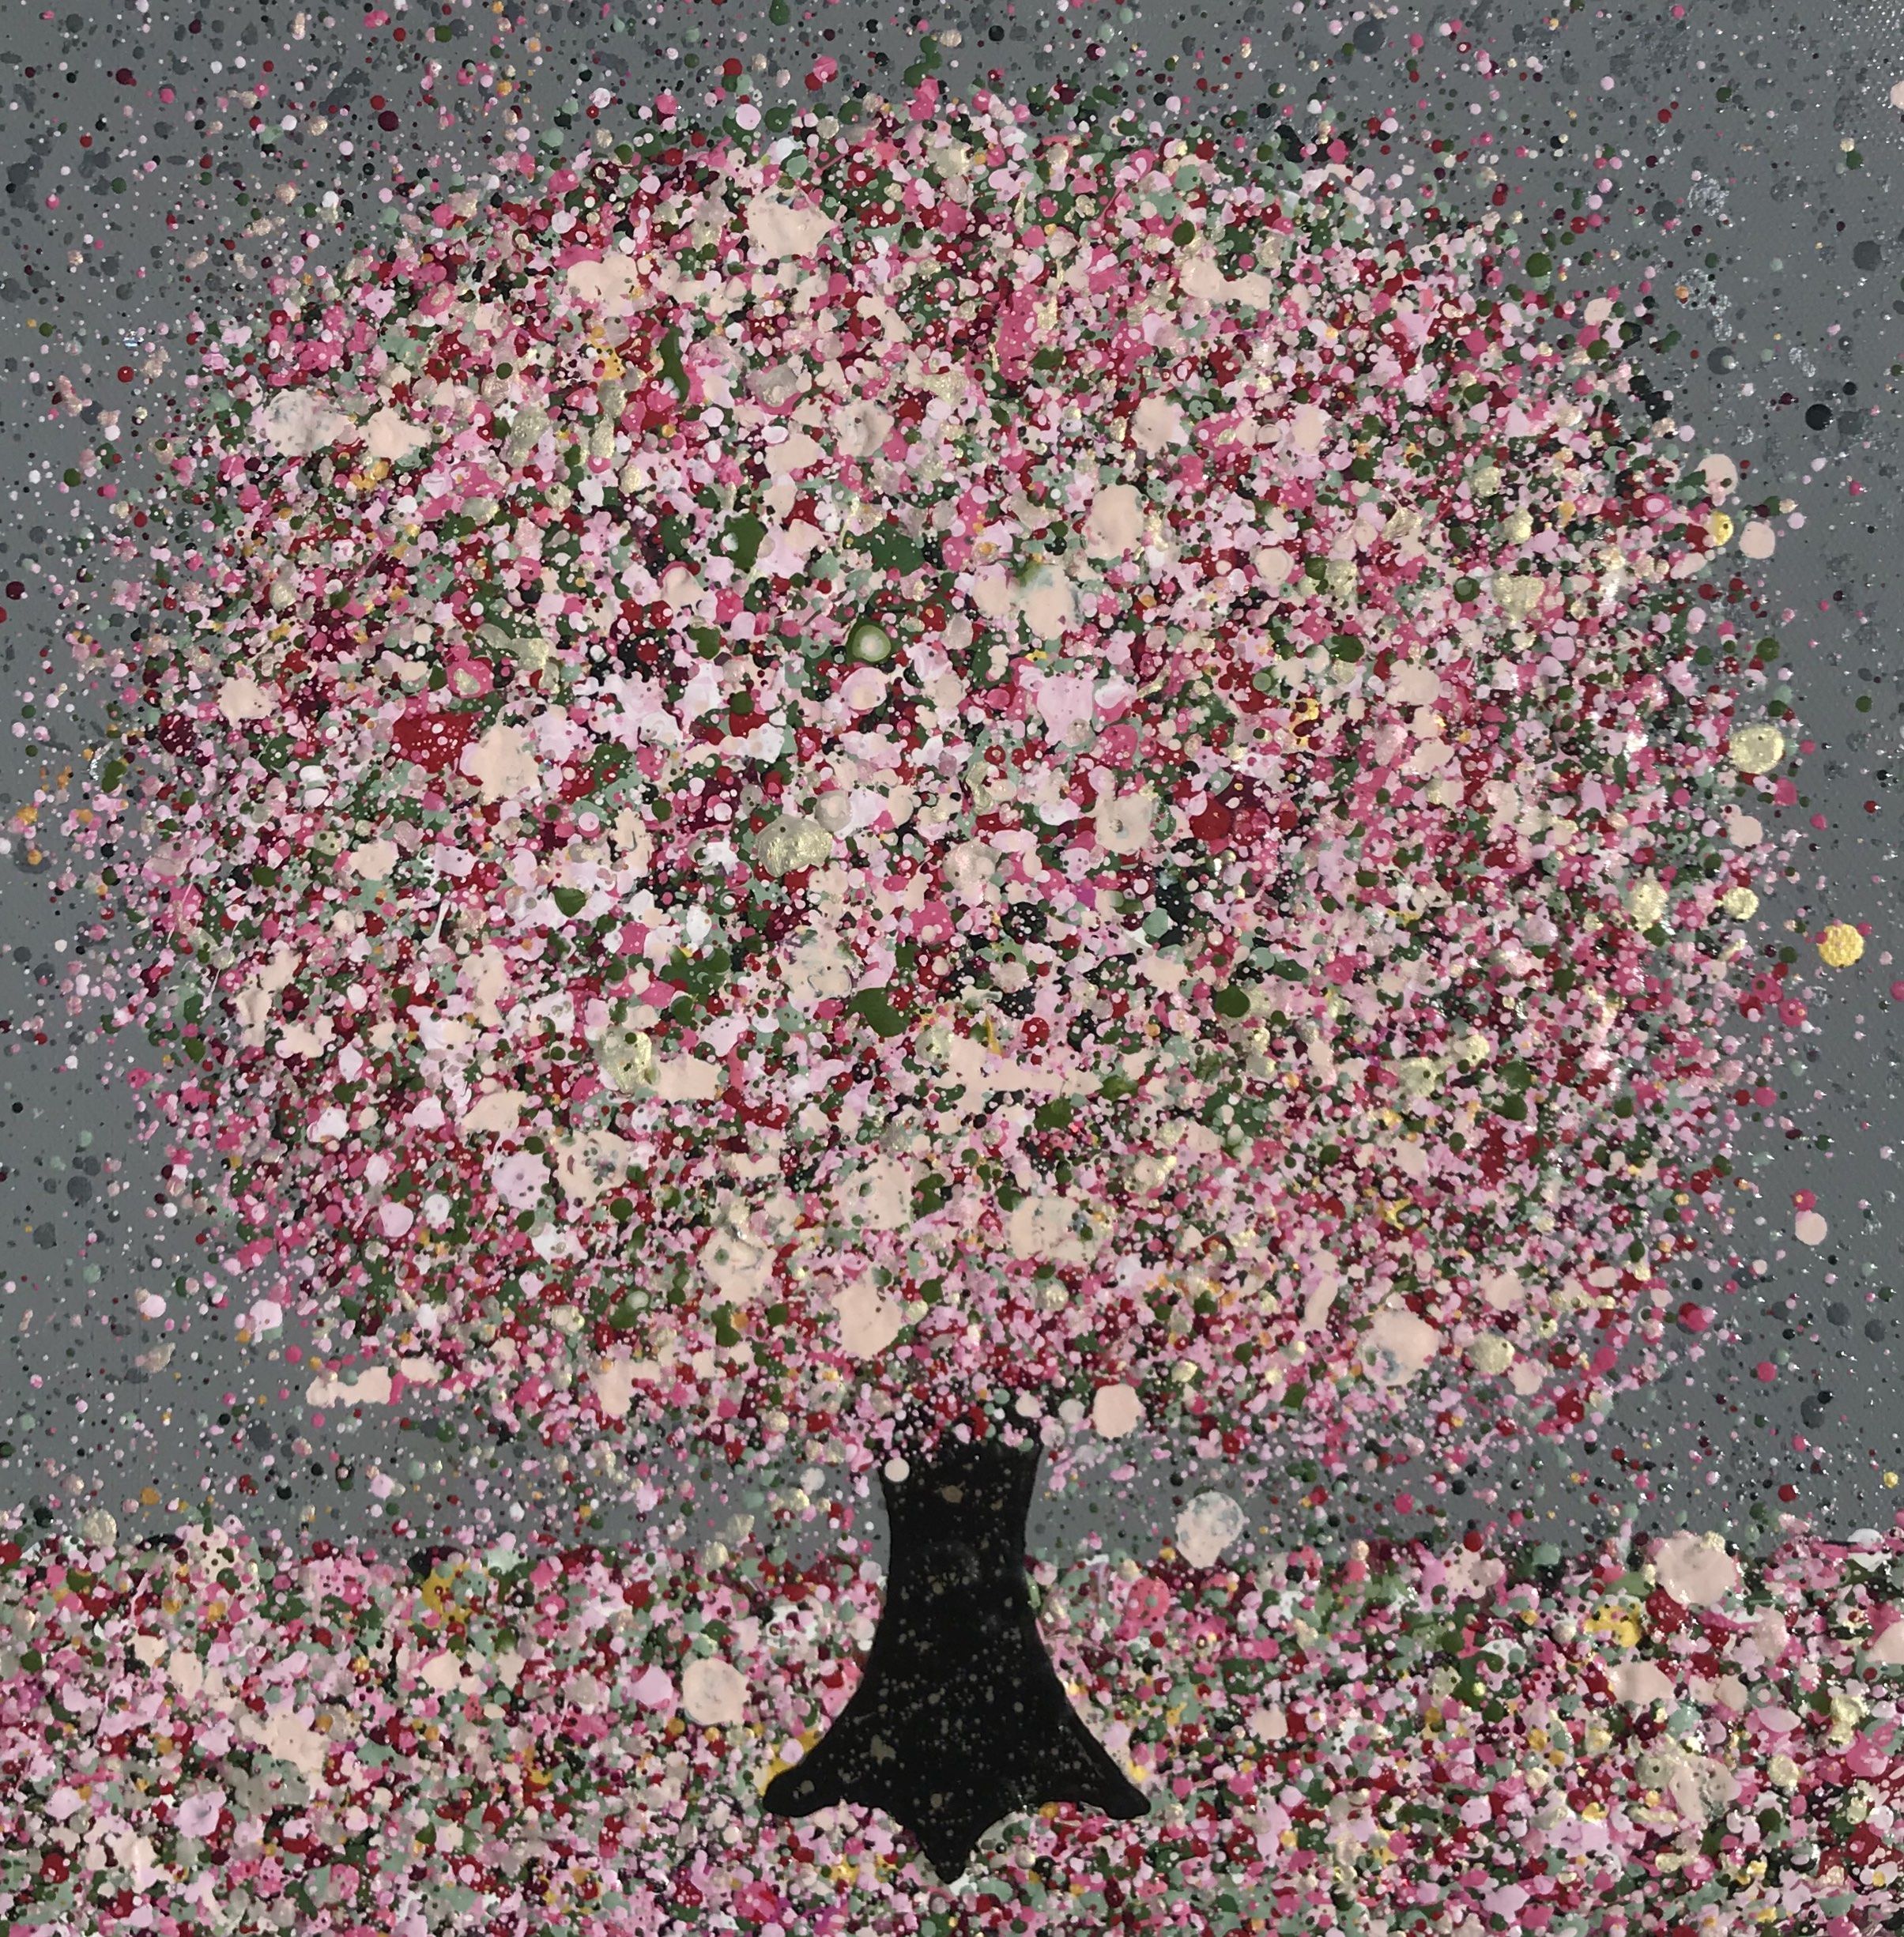 Whirling Cherry Blossom by Nicky Chubb